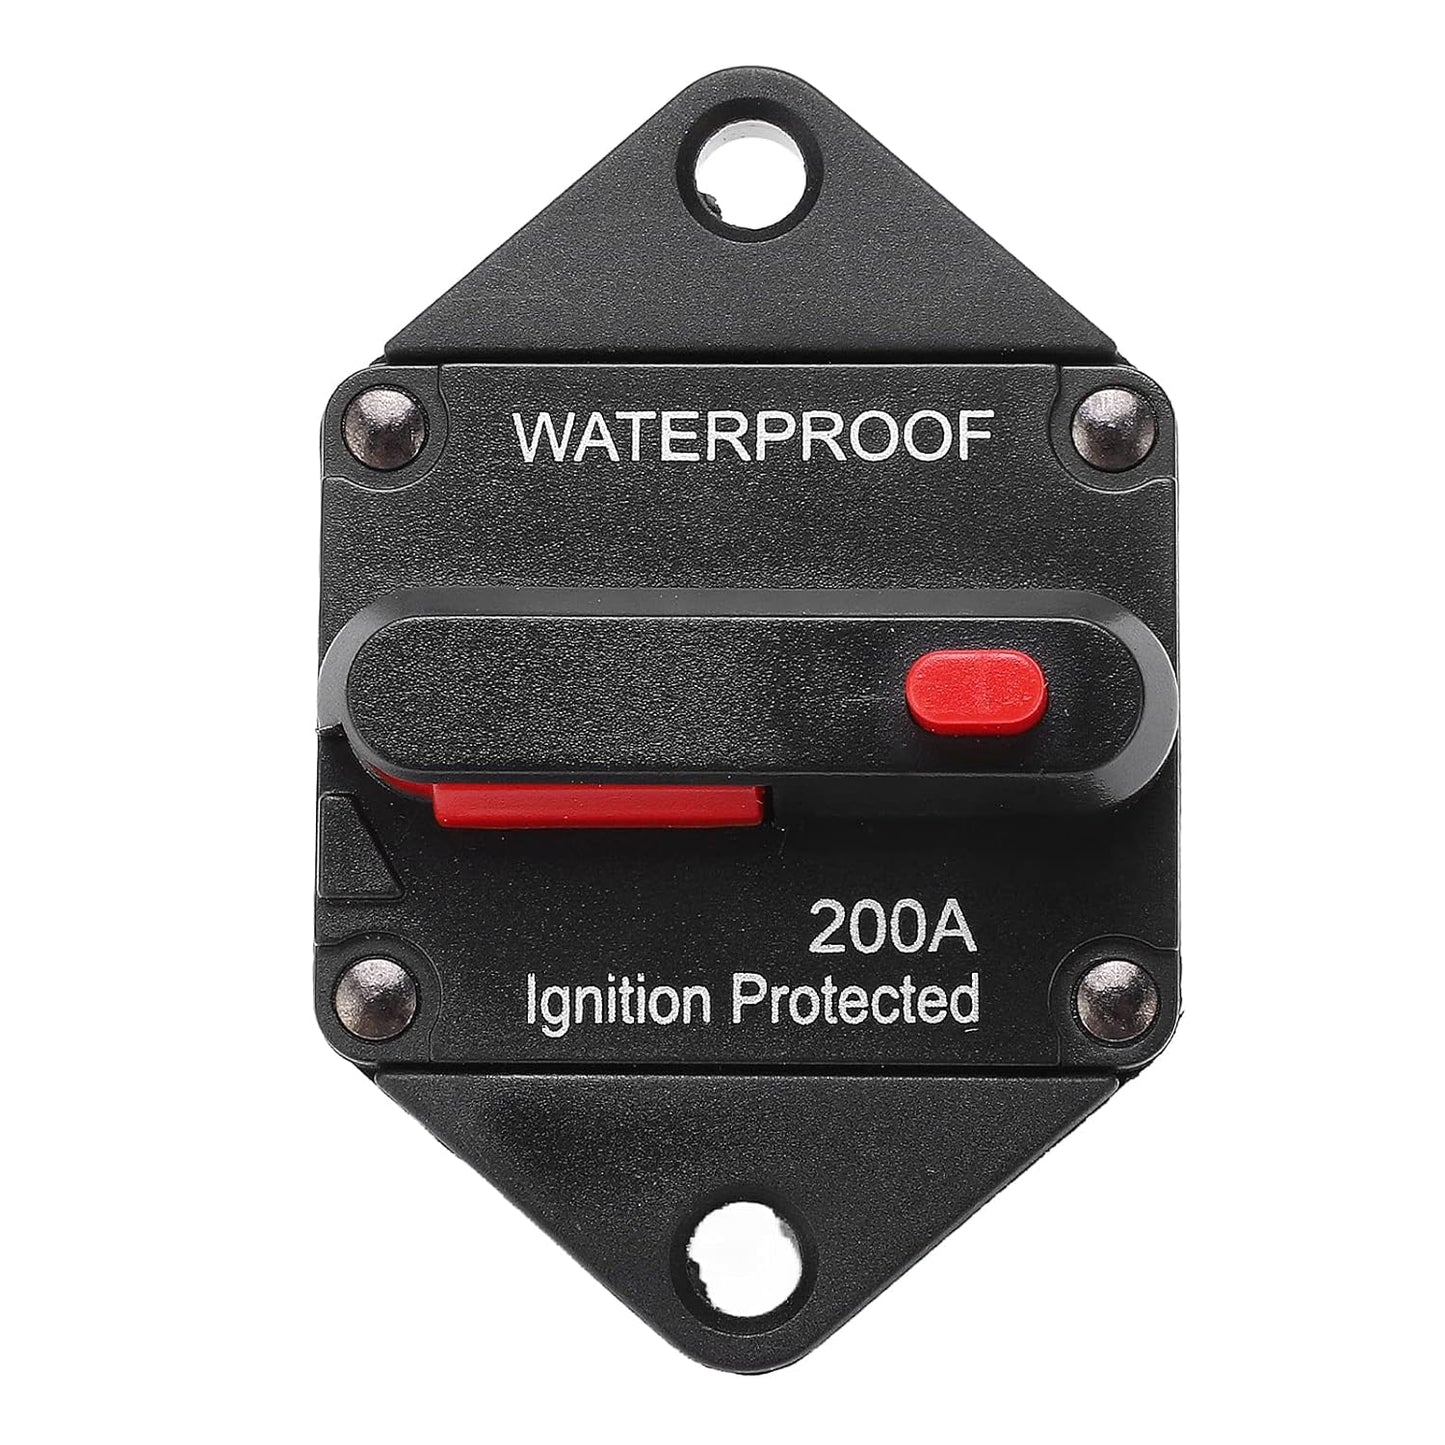 Circuit Breaker Ignition Protection Temperature Resistance Waterproof Overload Protector Switch with Toggle Switch for Car Boat Truck Bus RV ATV (200A)